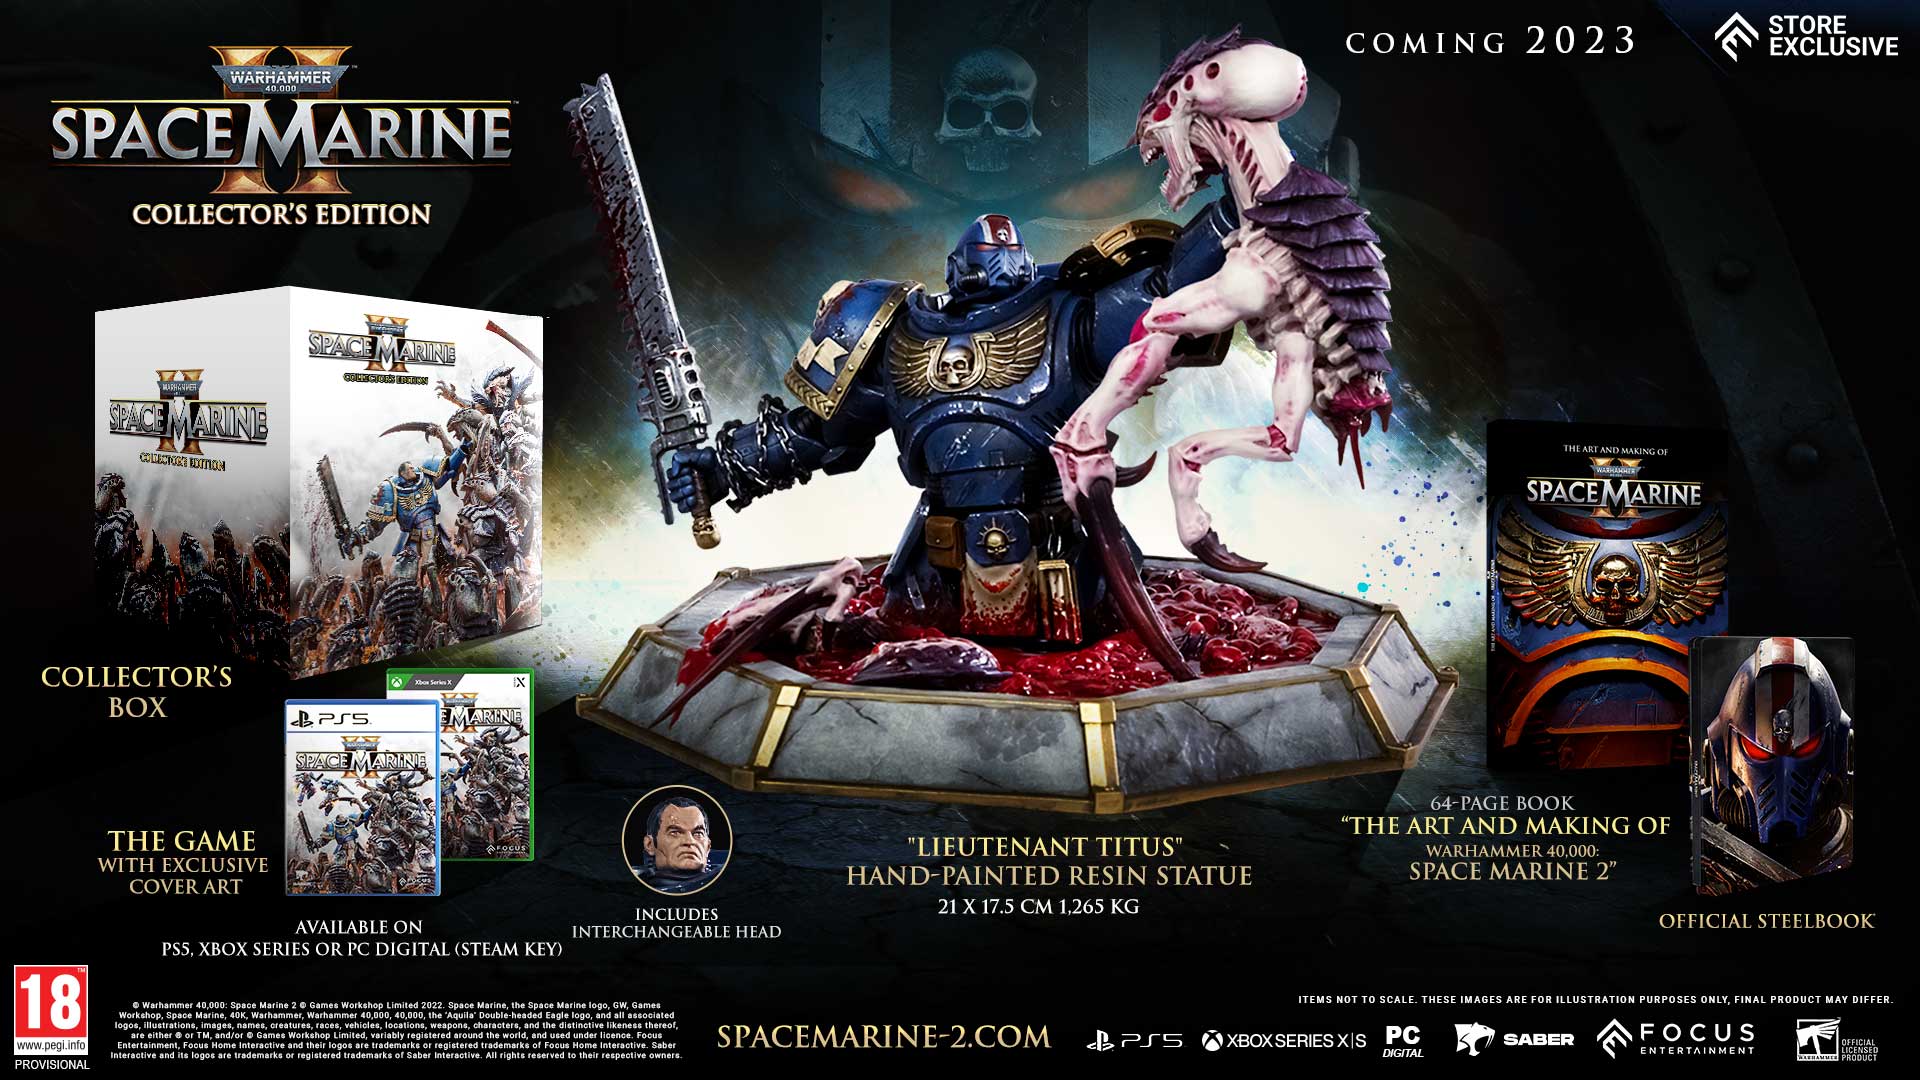 https://store.focus-entmt.com/eu/product/810741/warhammer-40000-space-marine-2-collector-s-edition-pc-steam